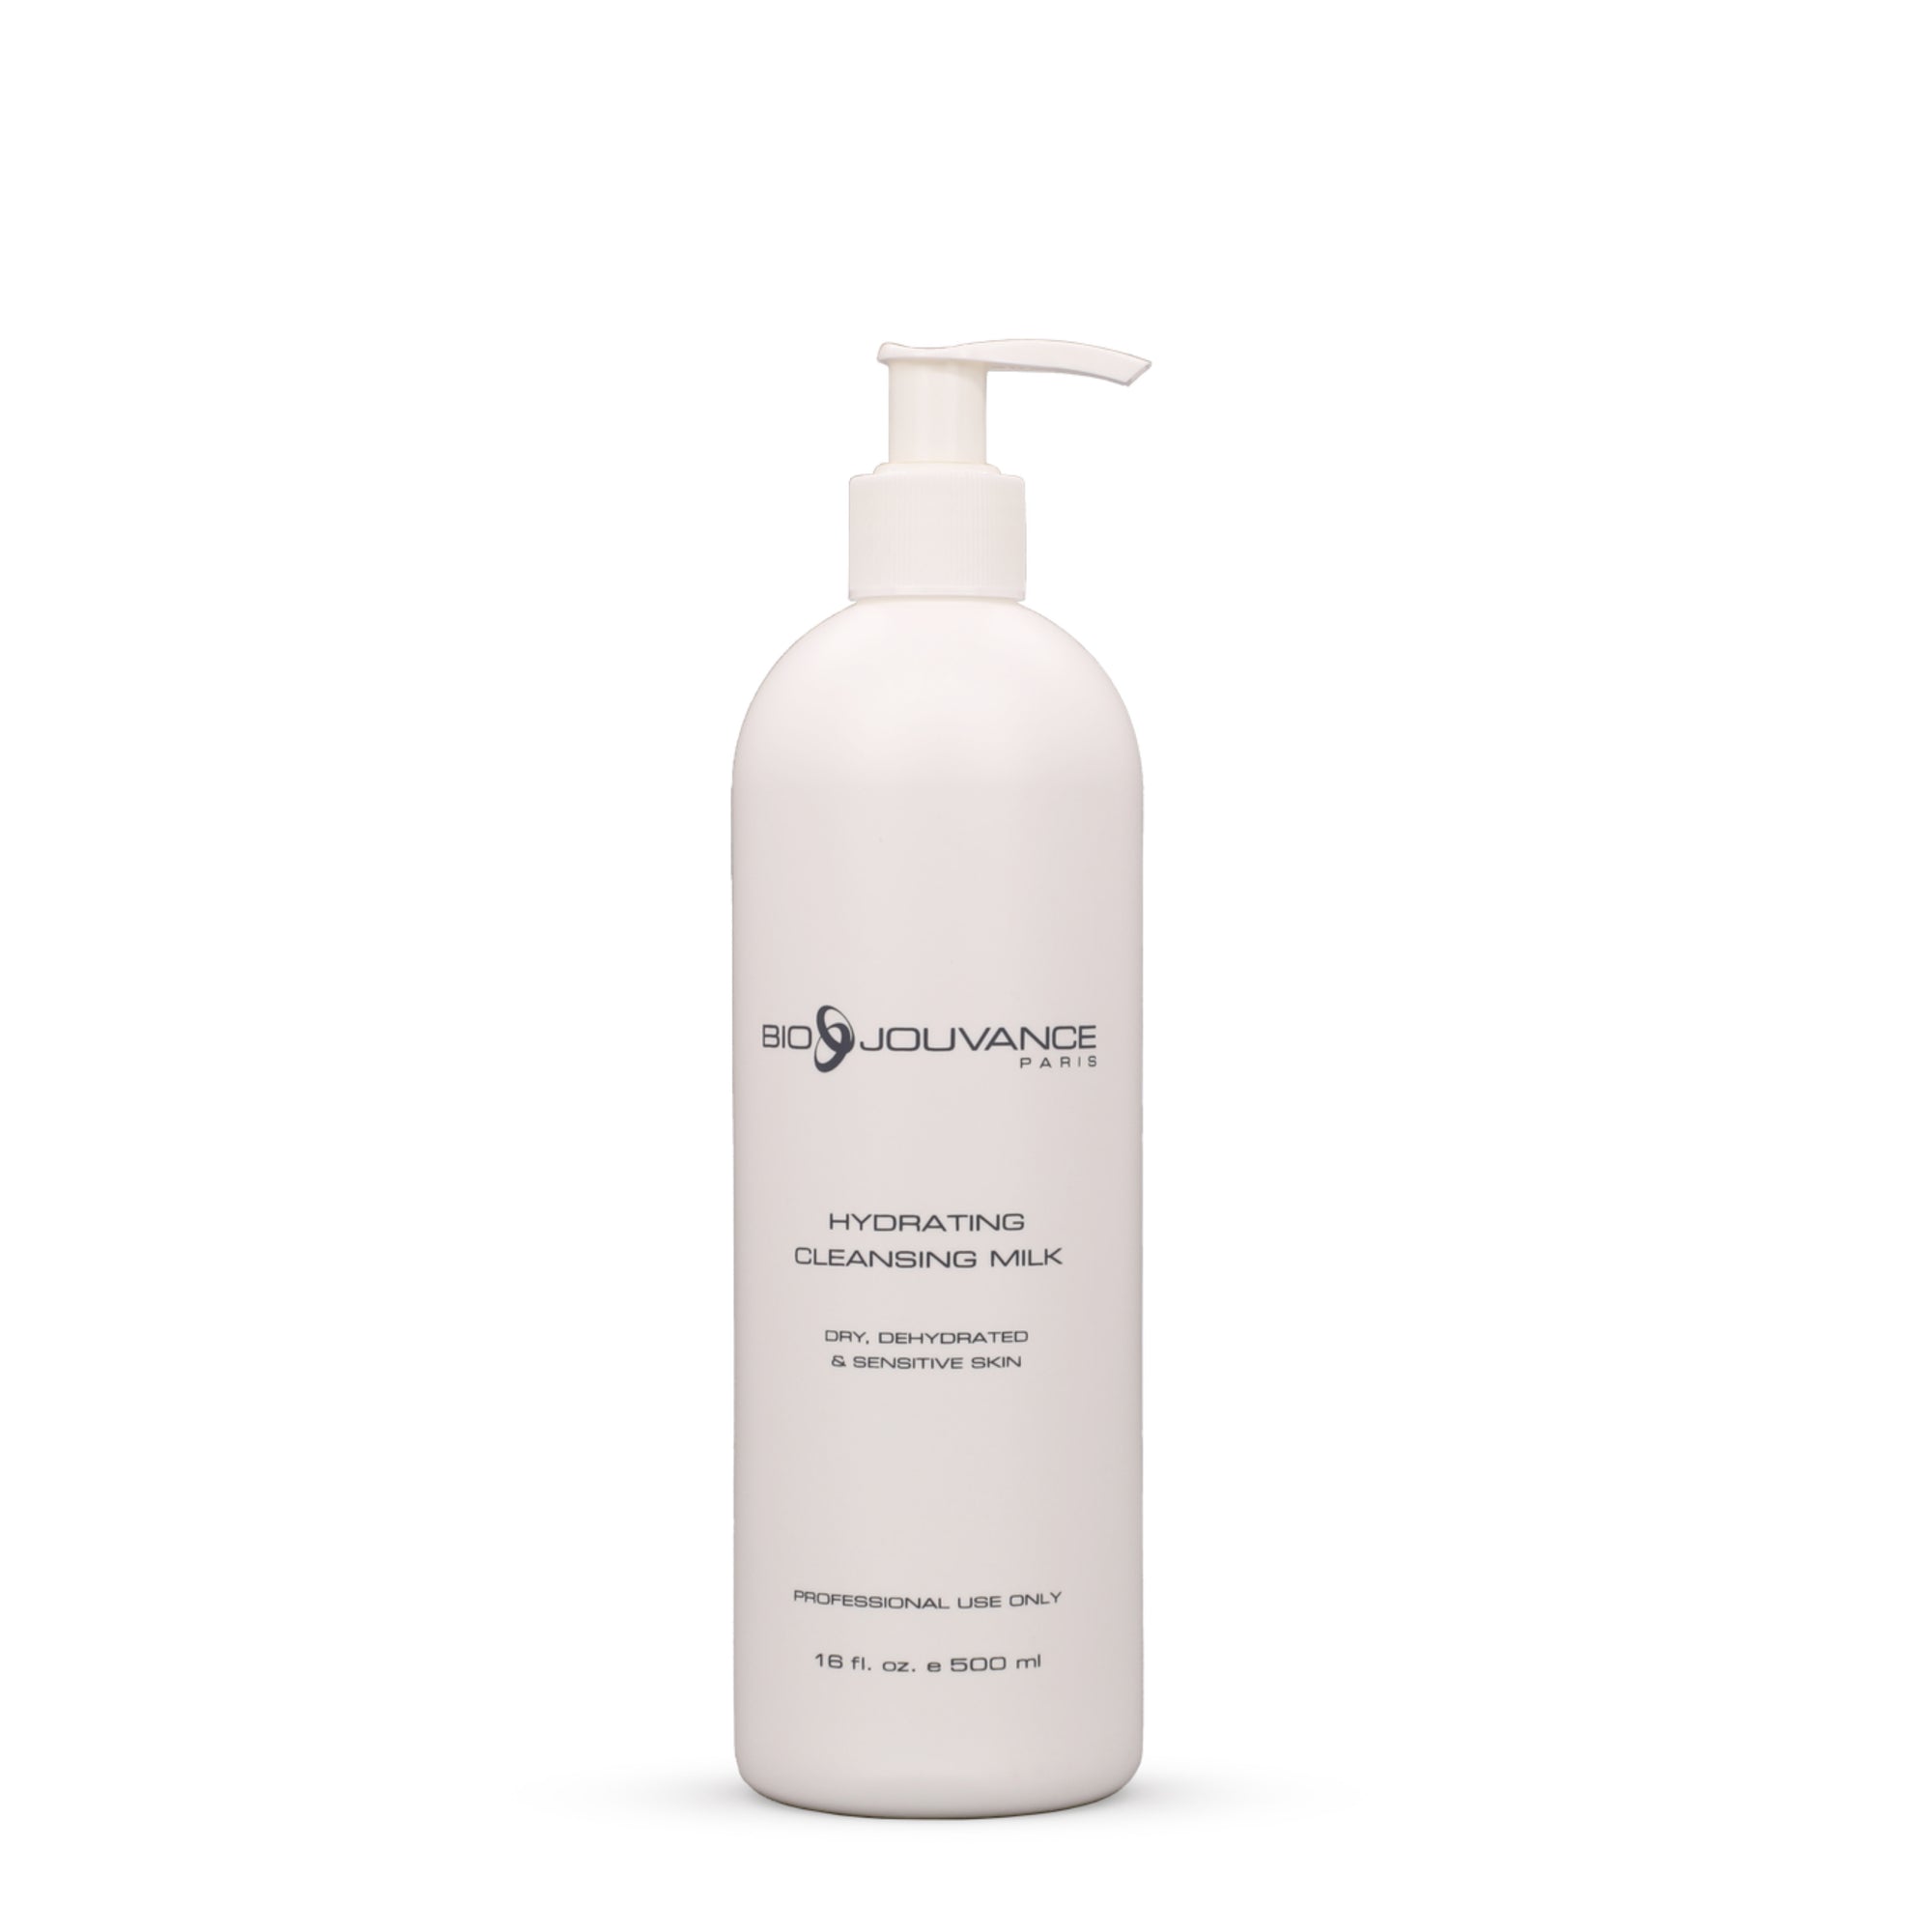 Hydrating Cleansing Milk